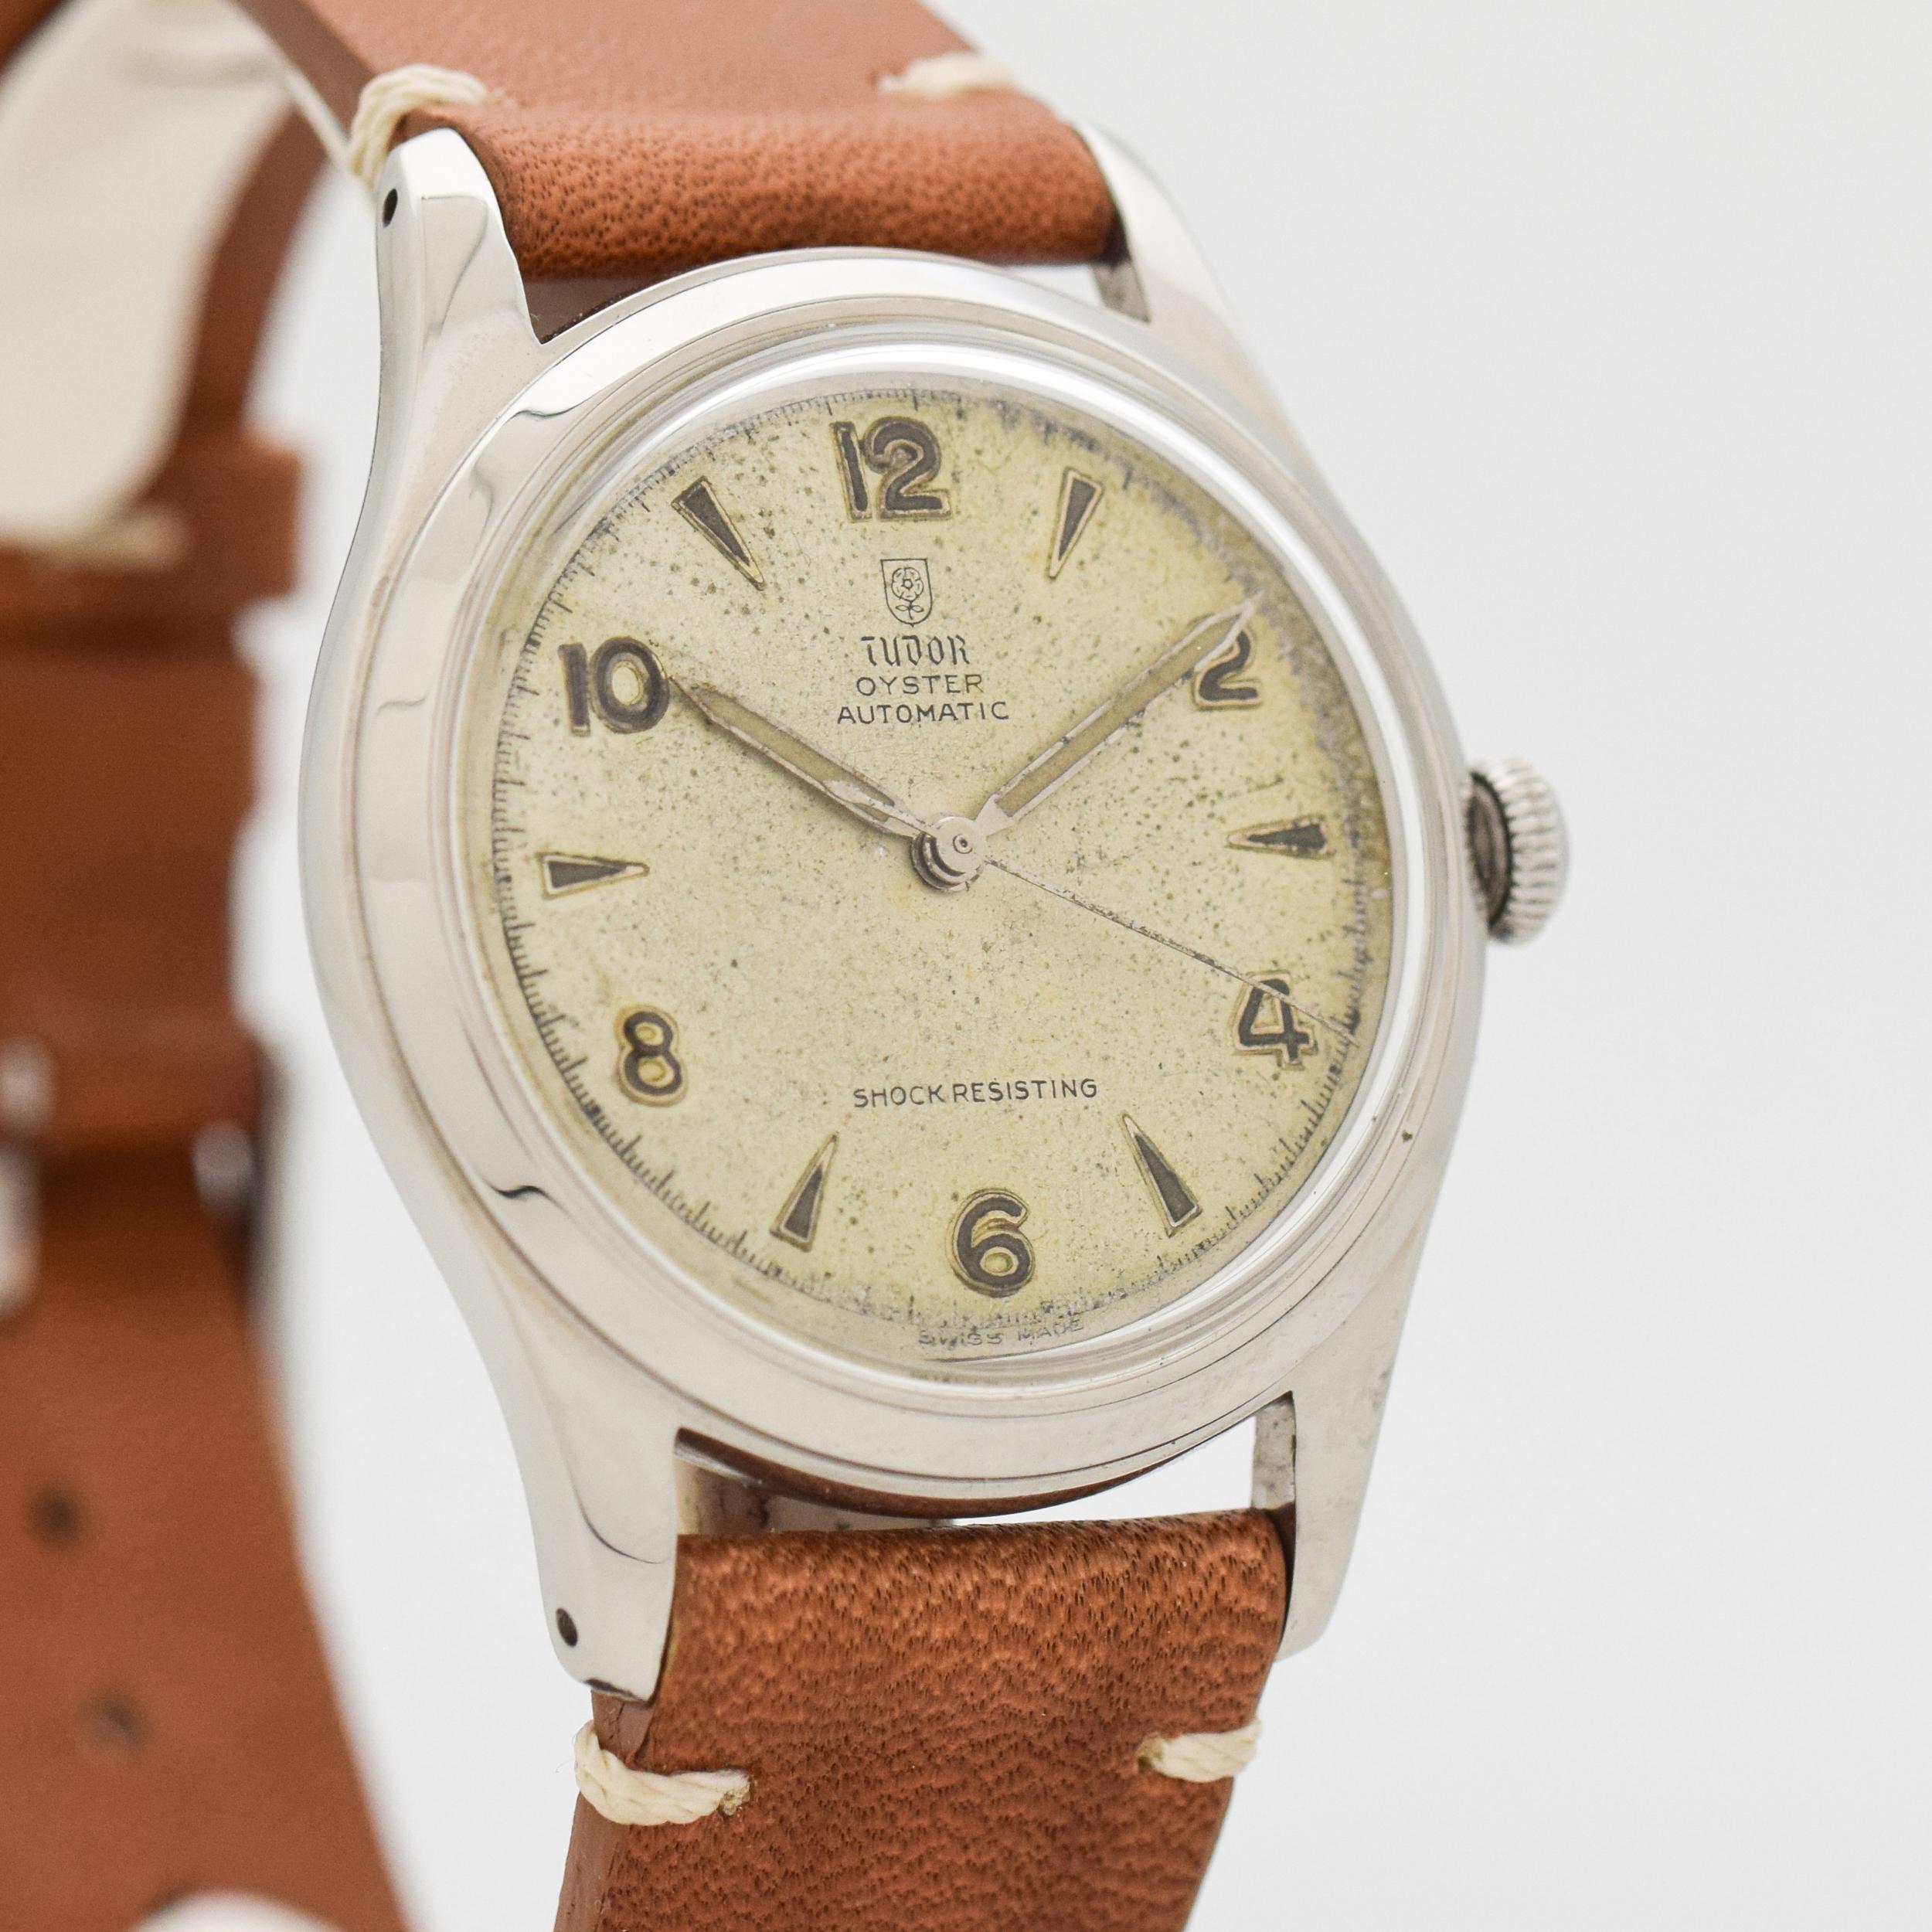 1950's Vintage Tudor Oyster Stainless Steel watch with Original Silver Dial with Applied Steel Arabic 2, 4, 6, 8, 10, and 12 with Arrow Markers. 34mm x 41mm lug to lug (1.34 in. x 1.61 in.) - Powered by a 22-jewel, automatic caliber movement. Triple